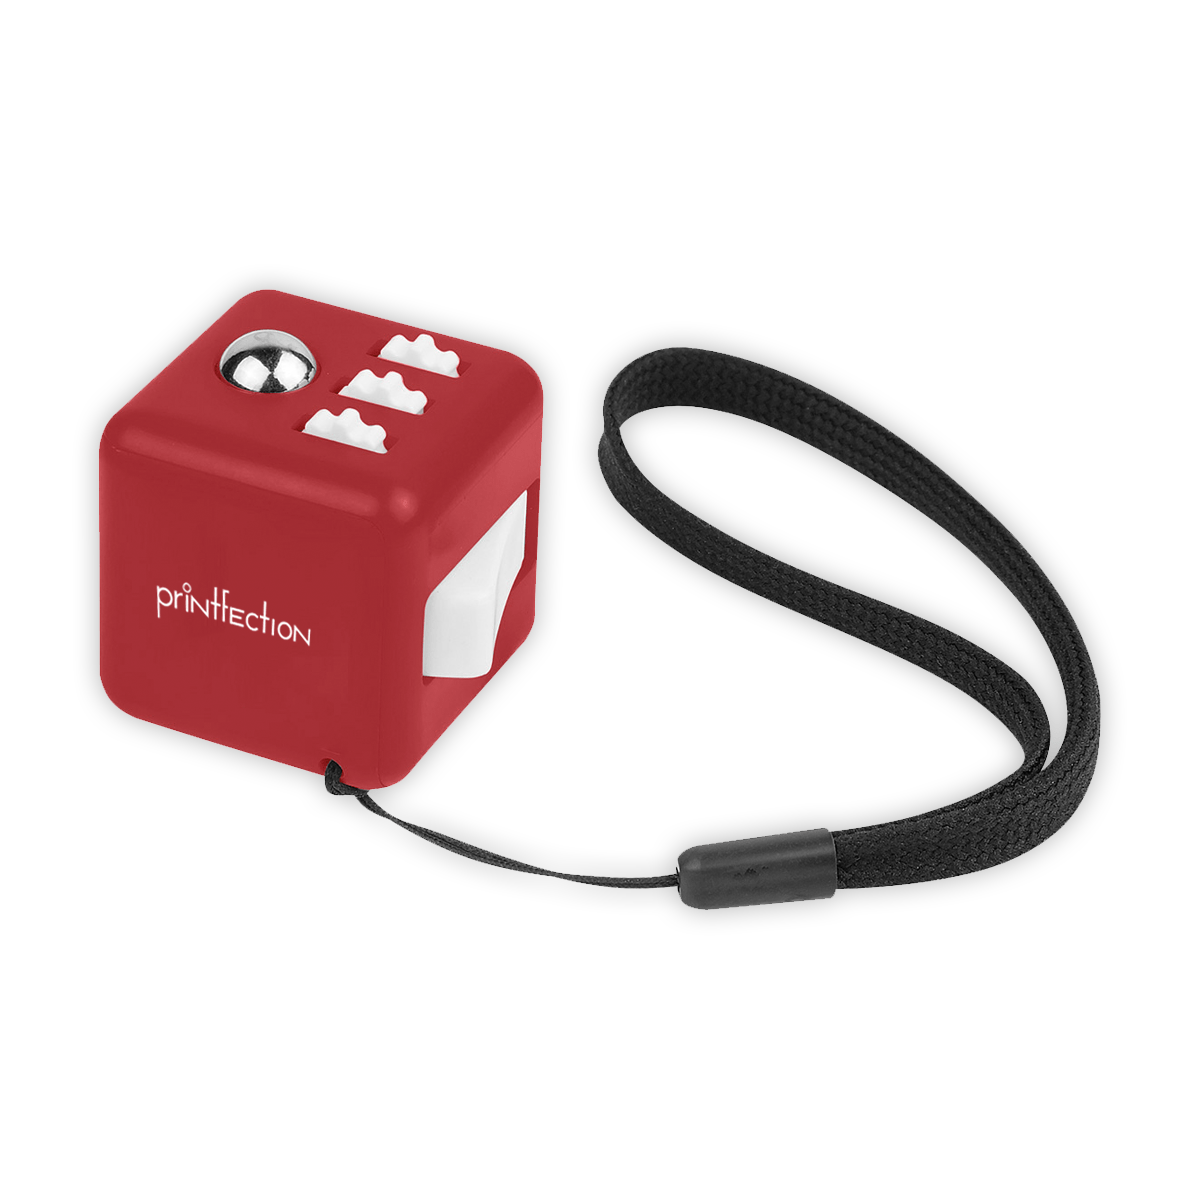 a fidget cube, a unique item you can brand with your logo